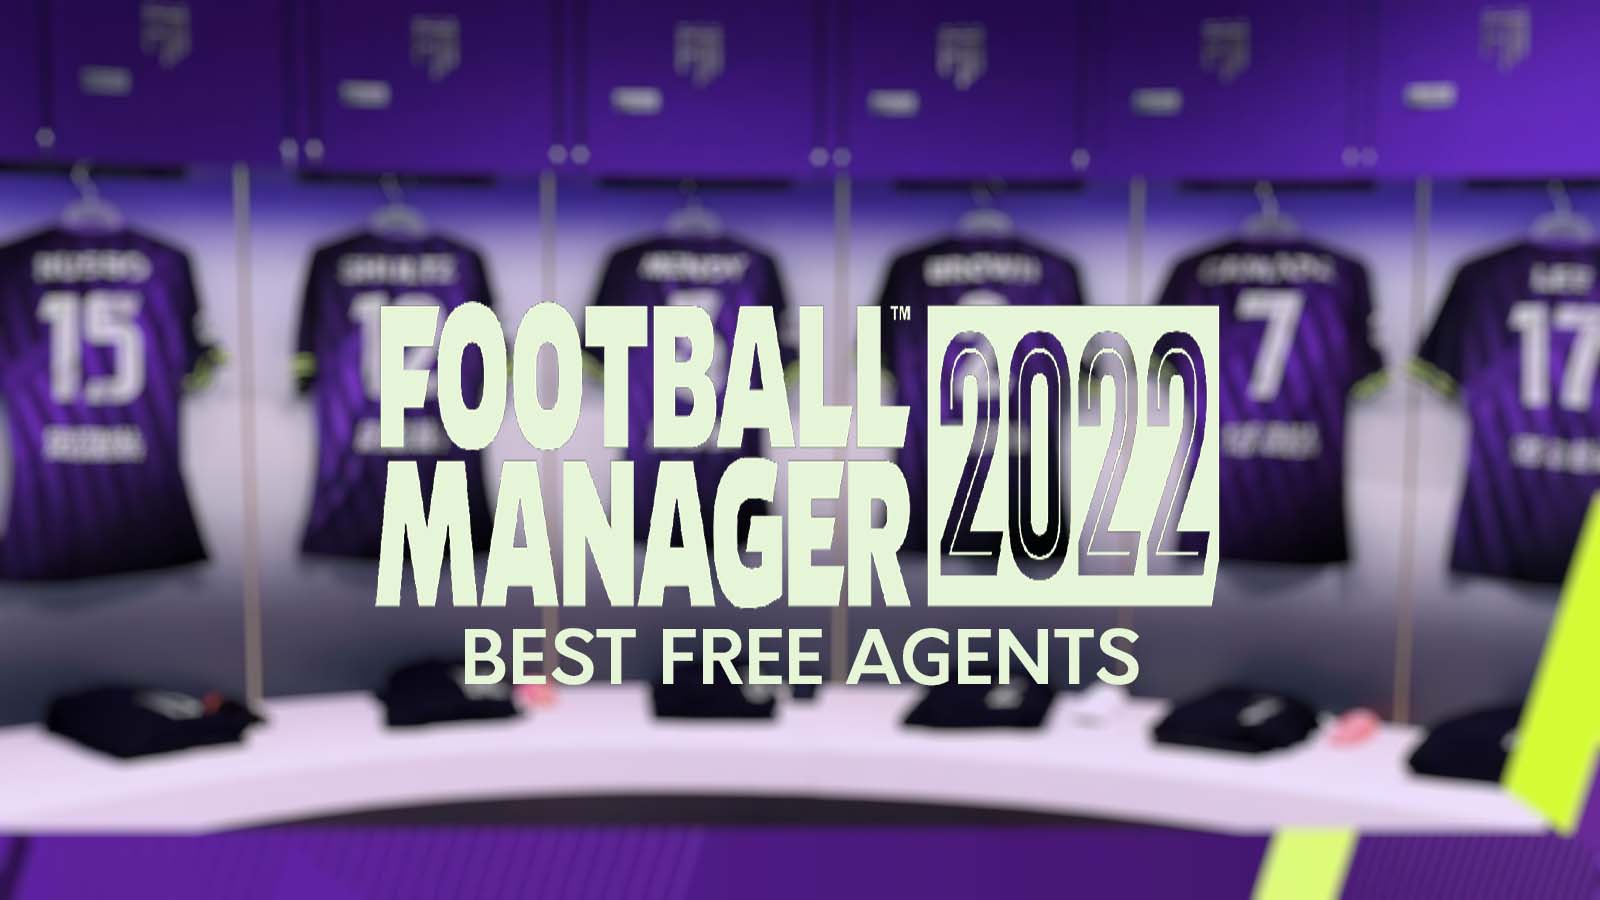 Football Manager 2022 Wallpapers